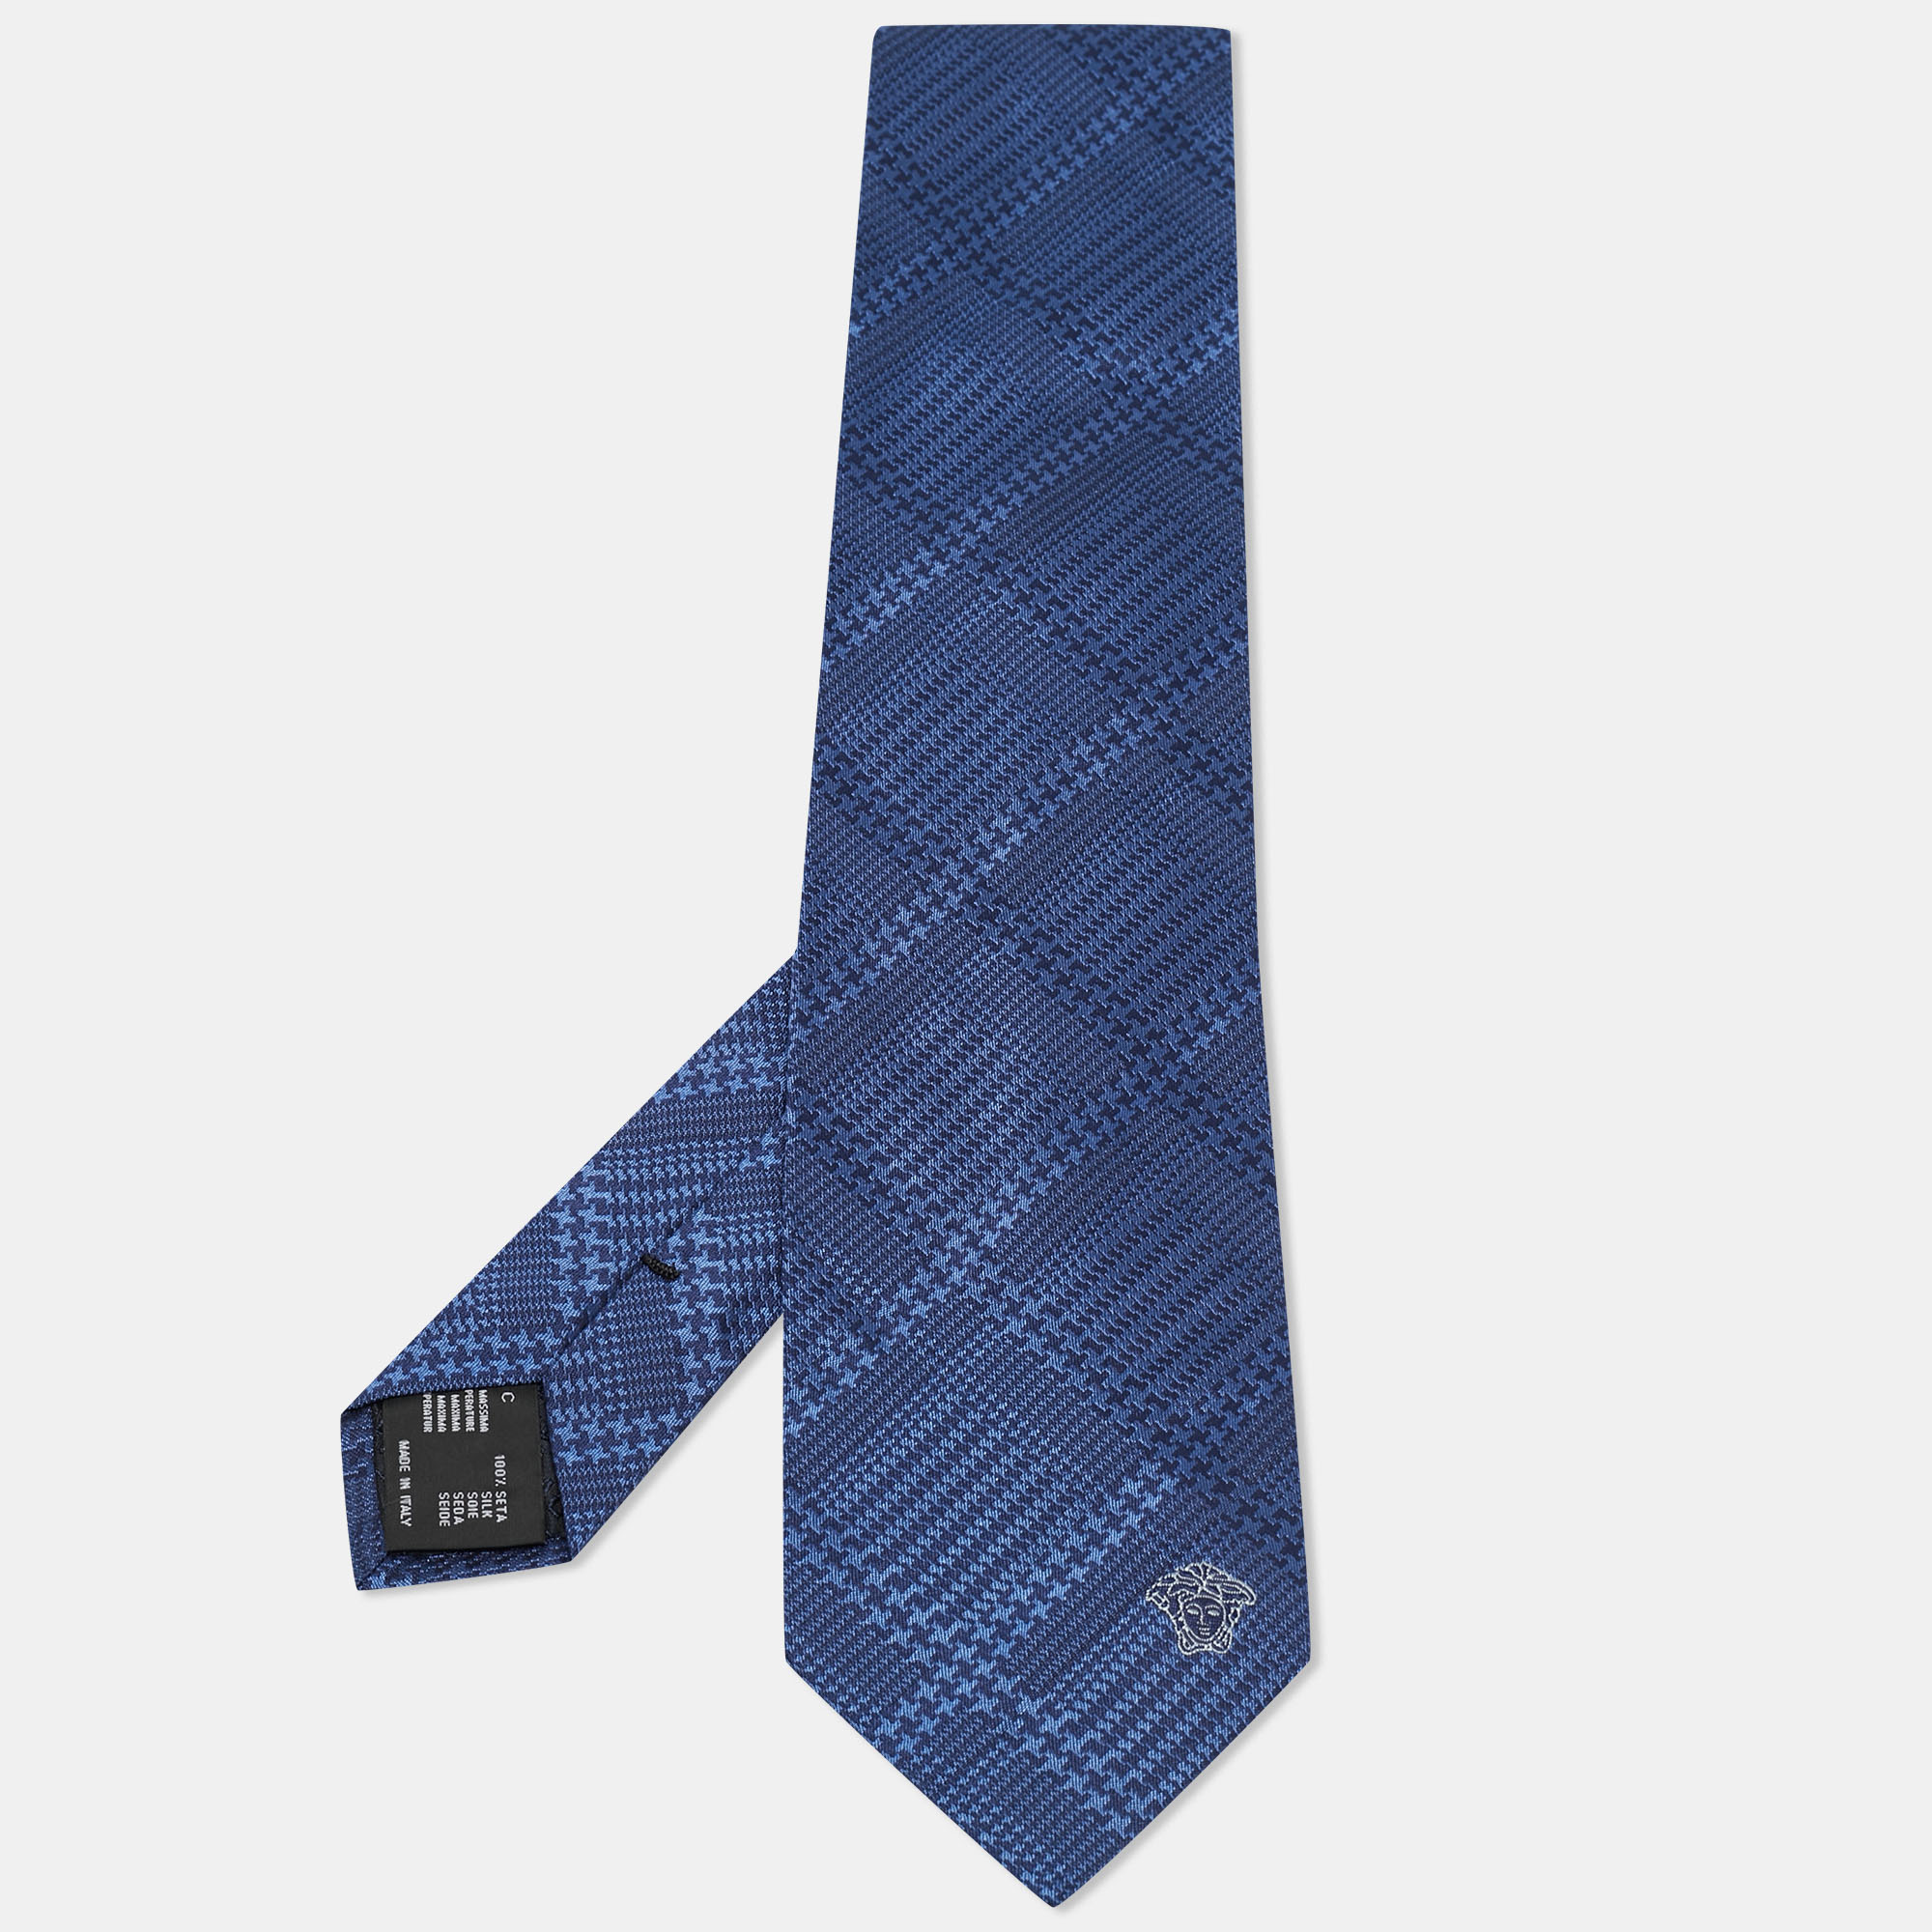 This designer tie is a perfect formal accessory that has a modern appeal. Made from luxurious materials it features intricate patterns and the brand label is neatly stitched at the back. It is sure to add style to your blazers.